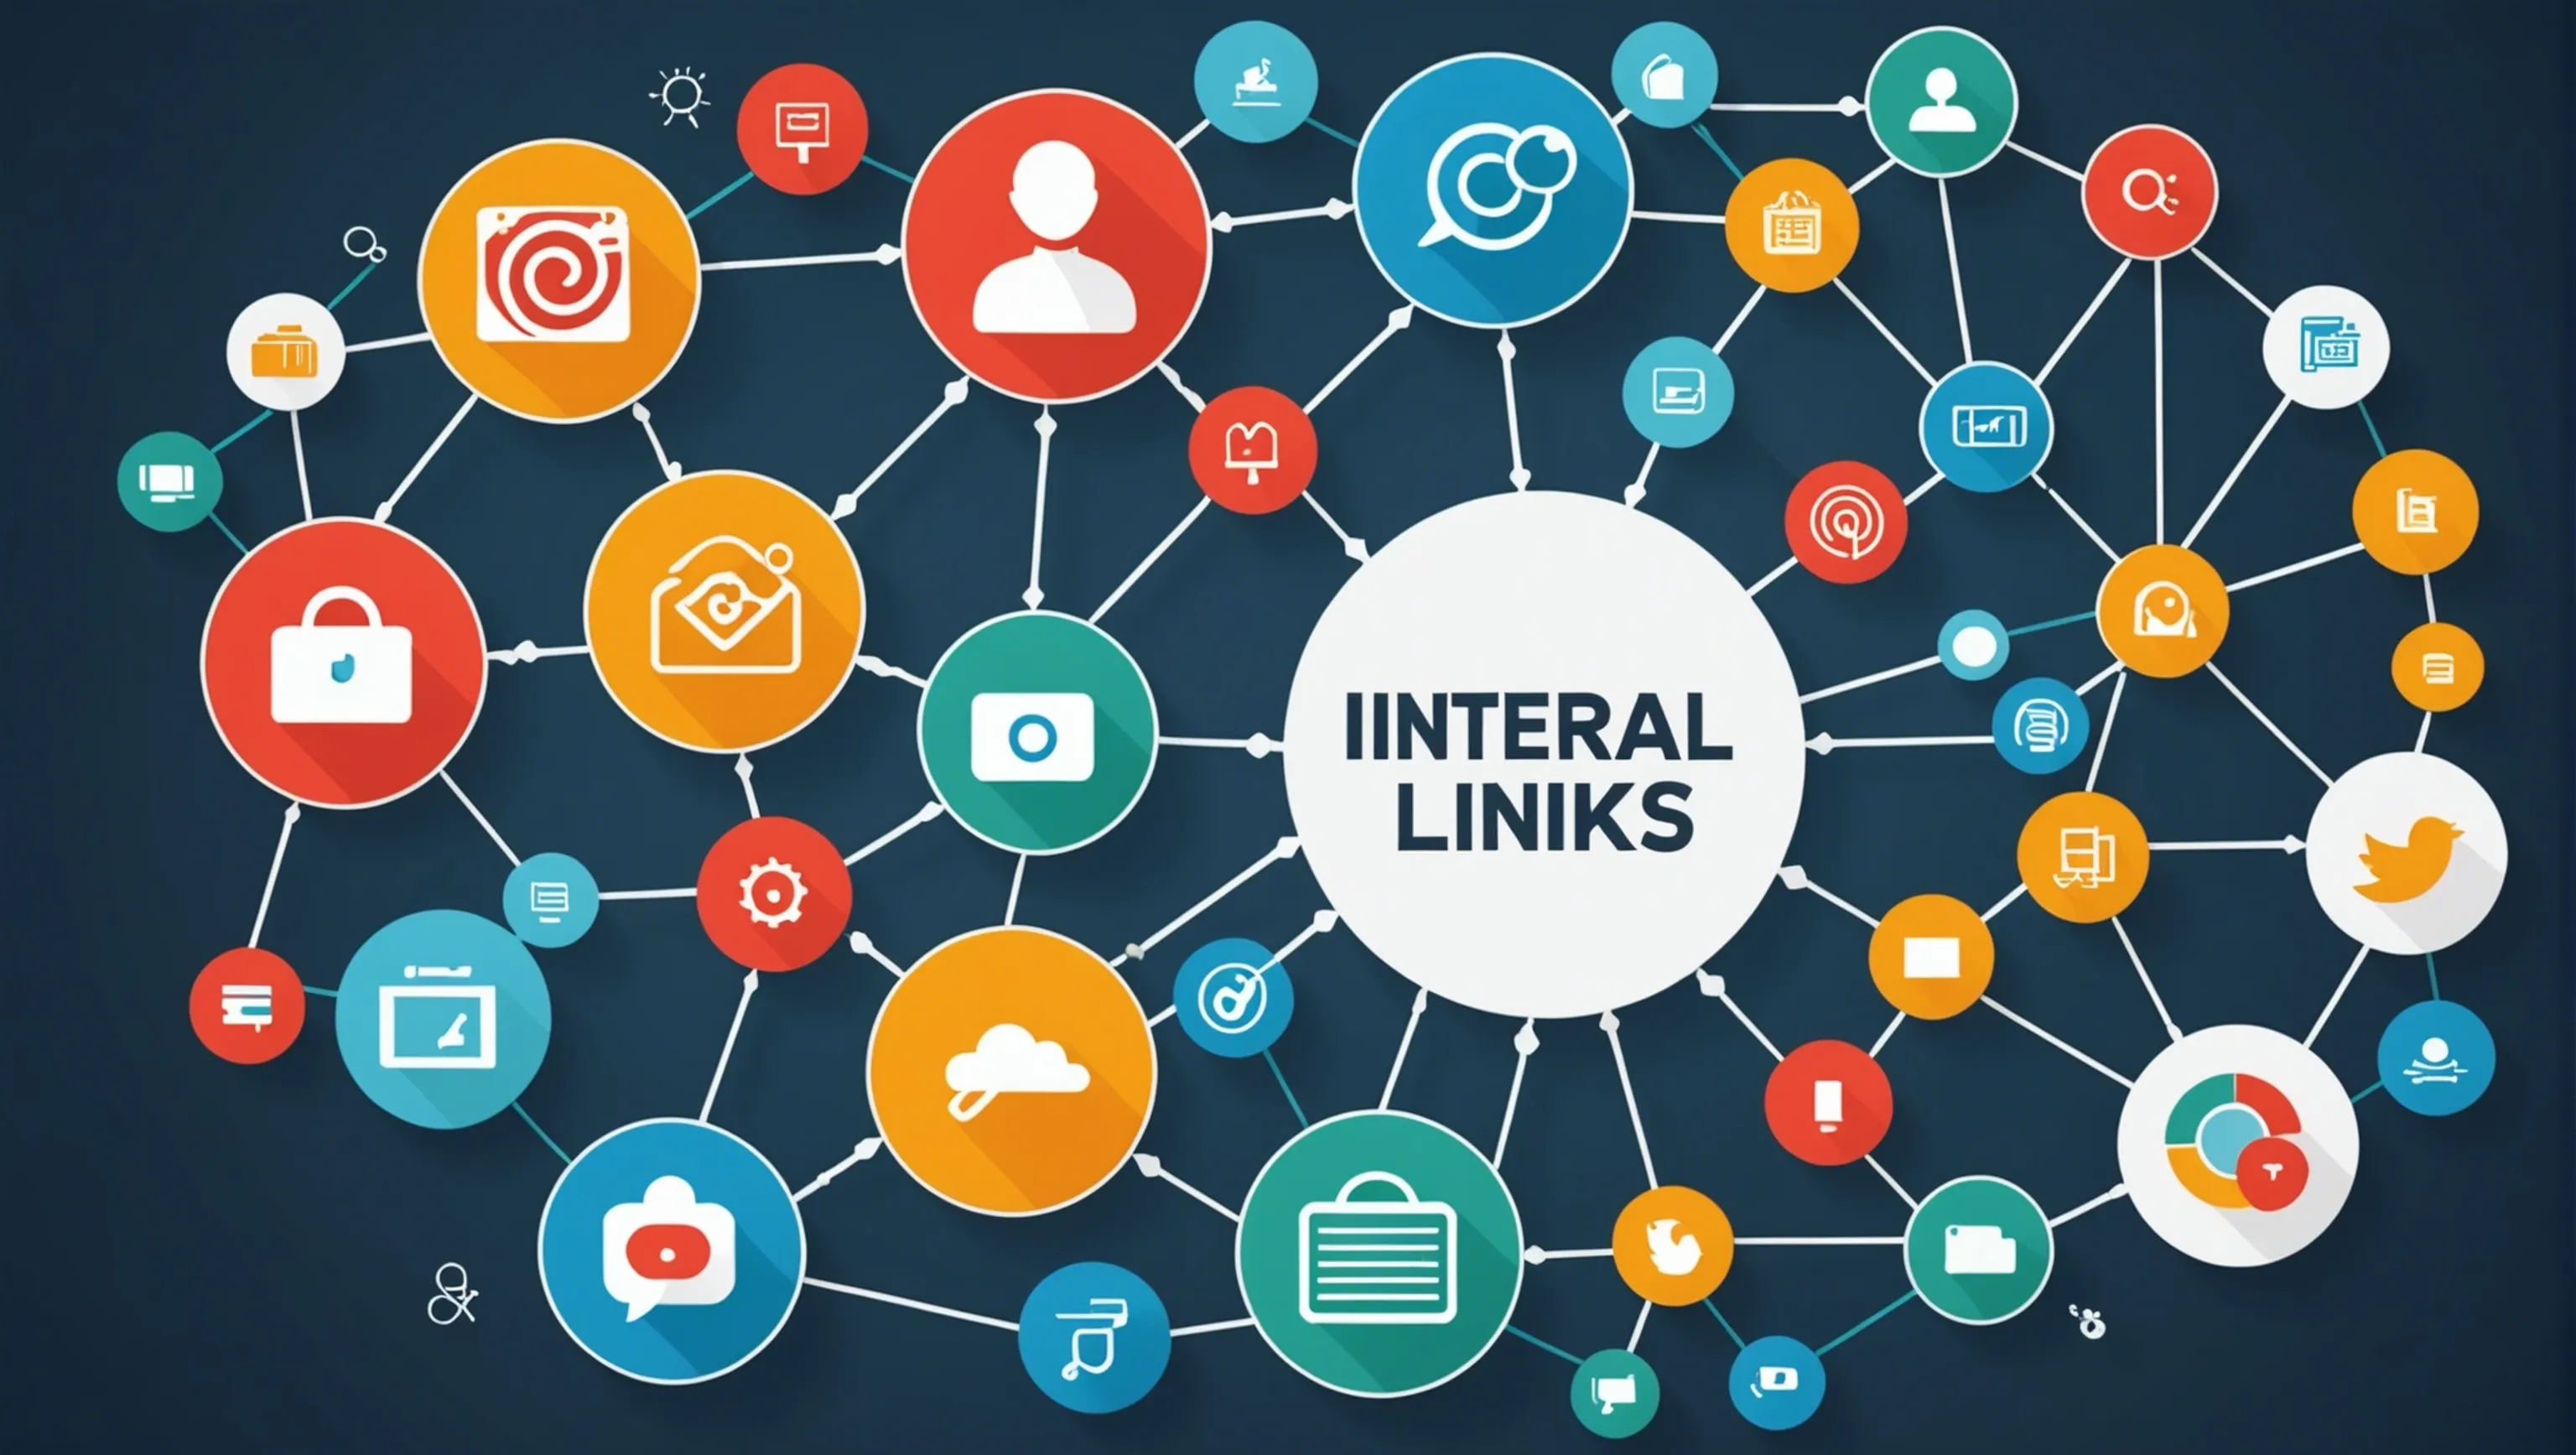 Internal and external linking for marketing professionals